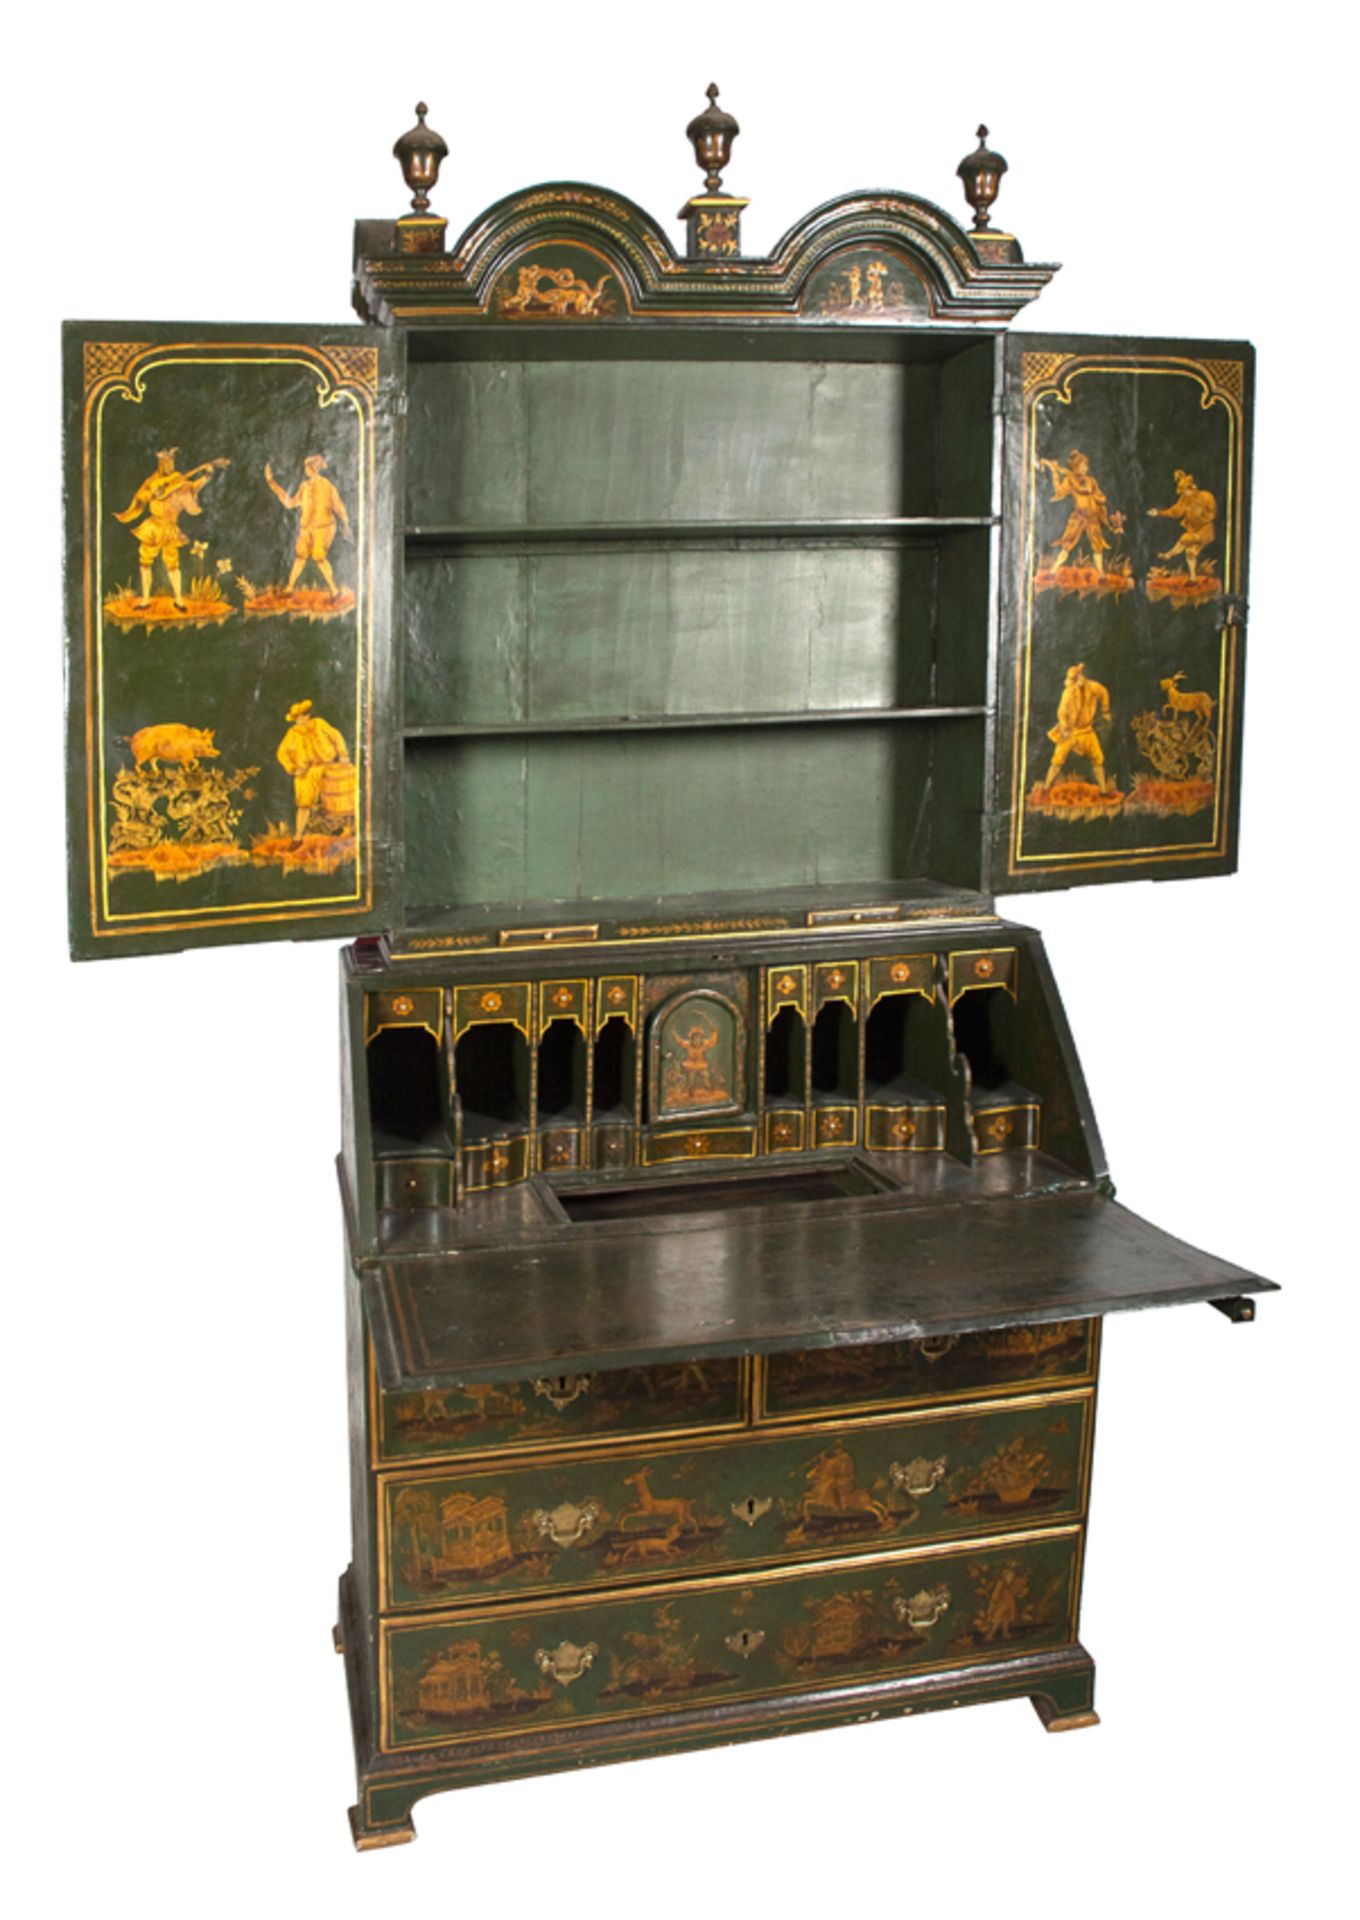 Carved, lacquered and gilded wooden cabinet with Chinese-style decoration England. 19th century. - Bild 4 aus 11